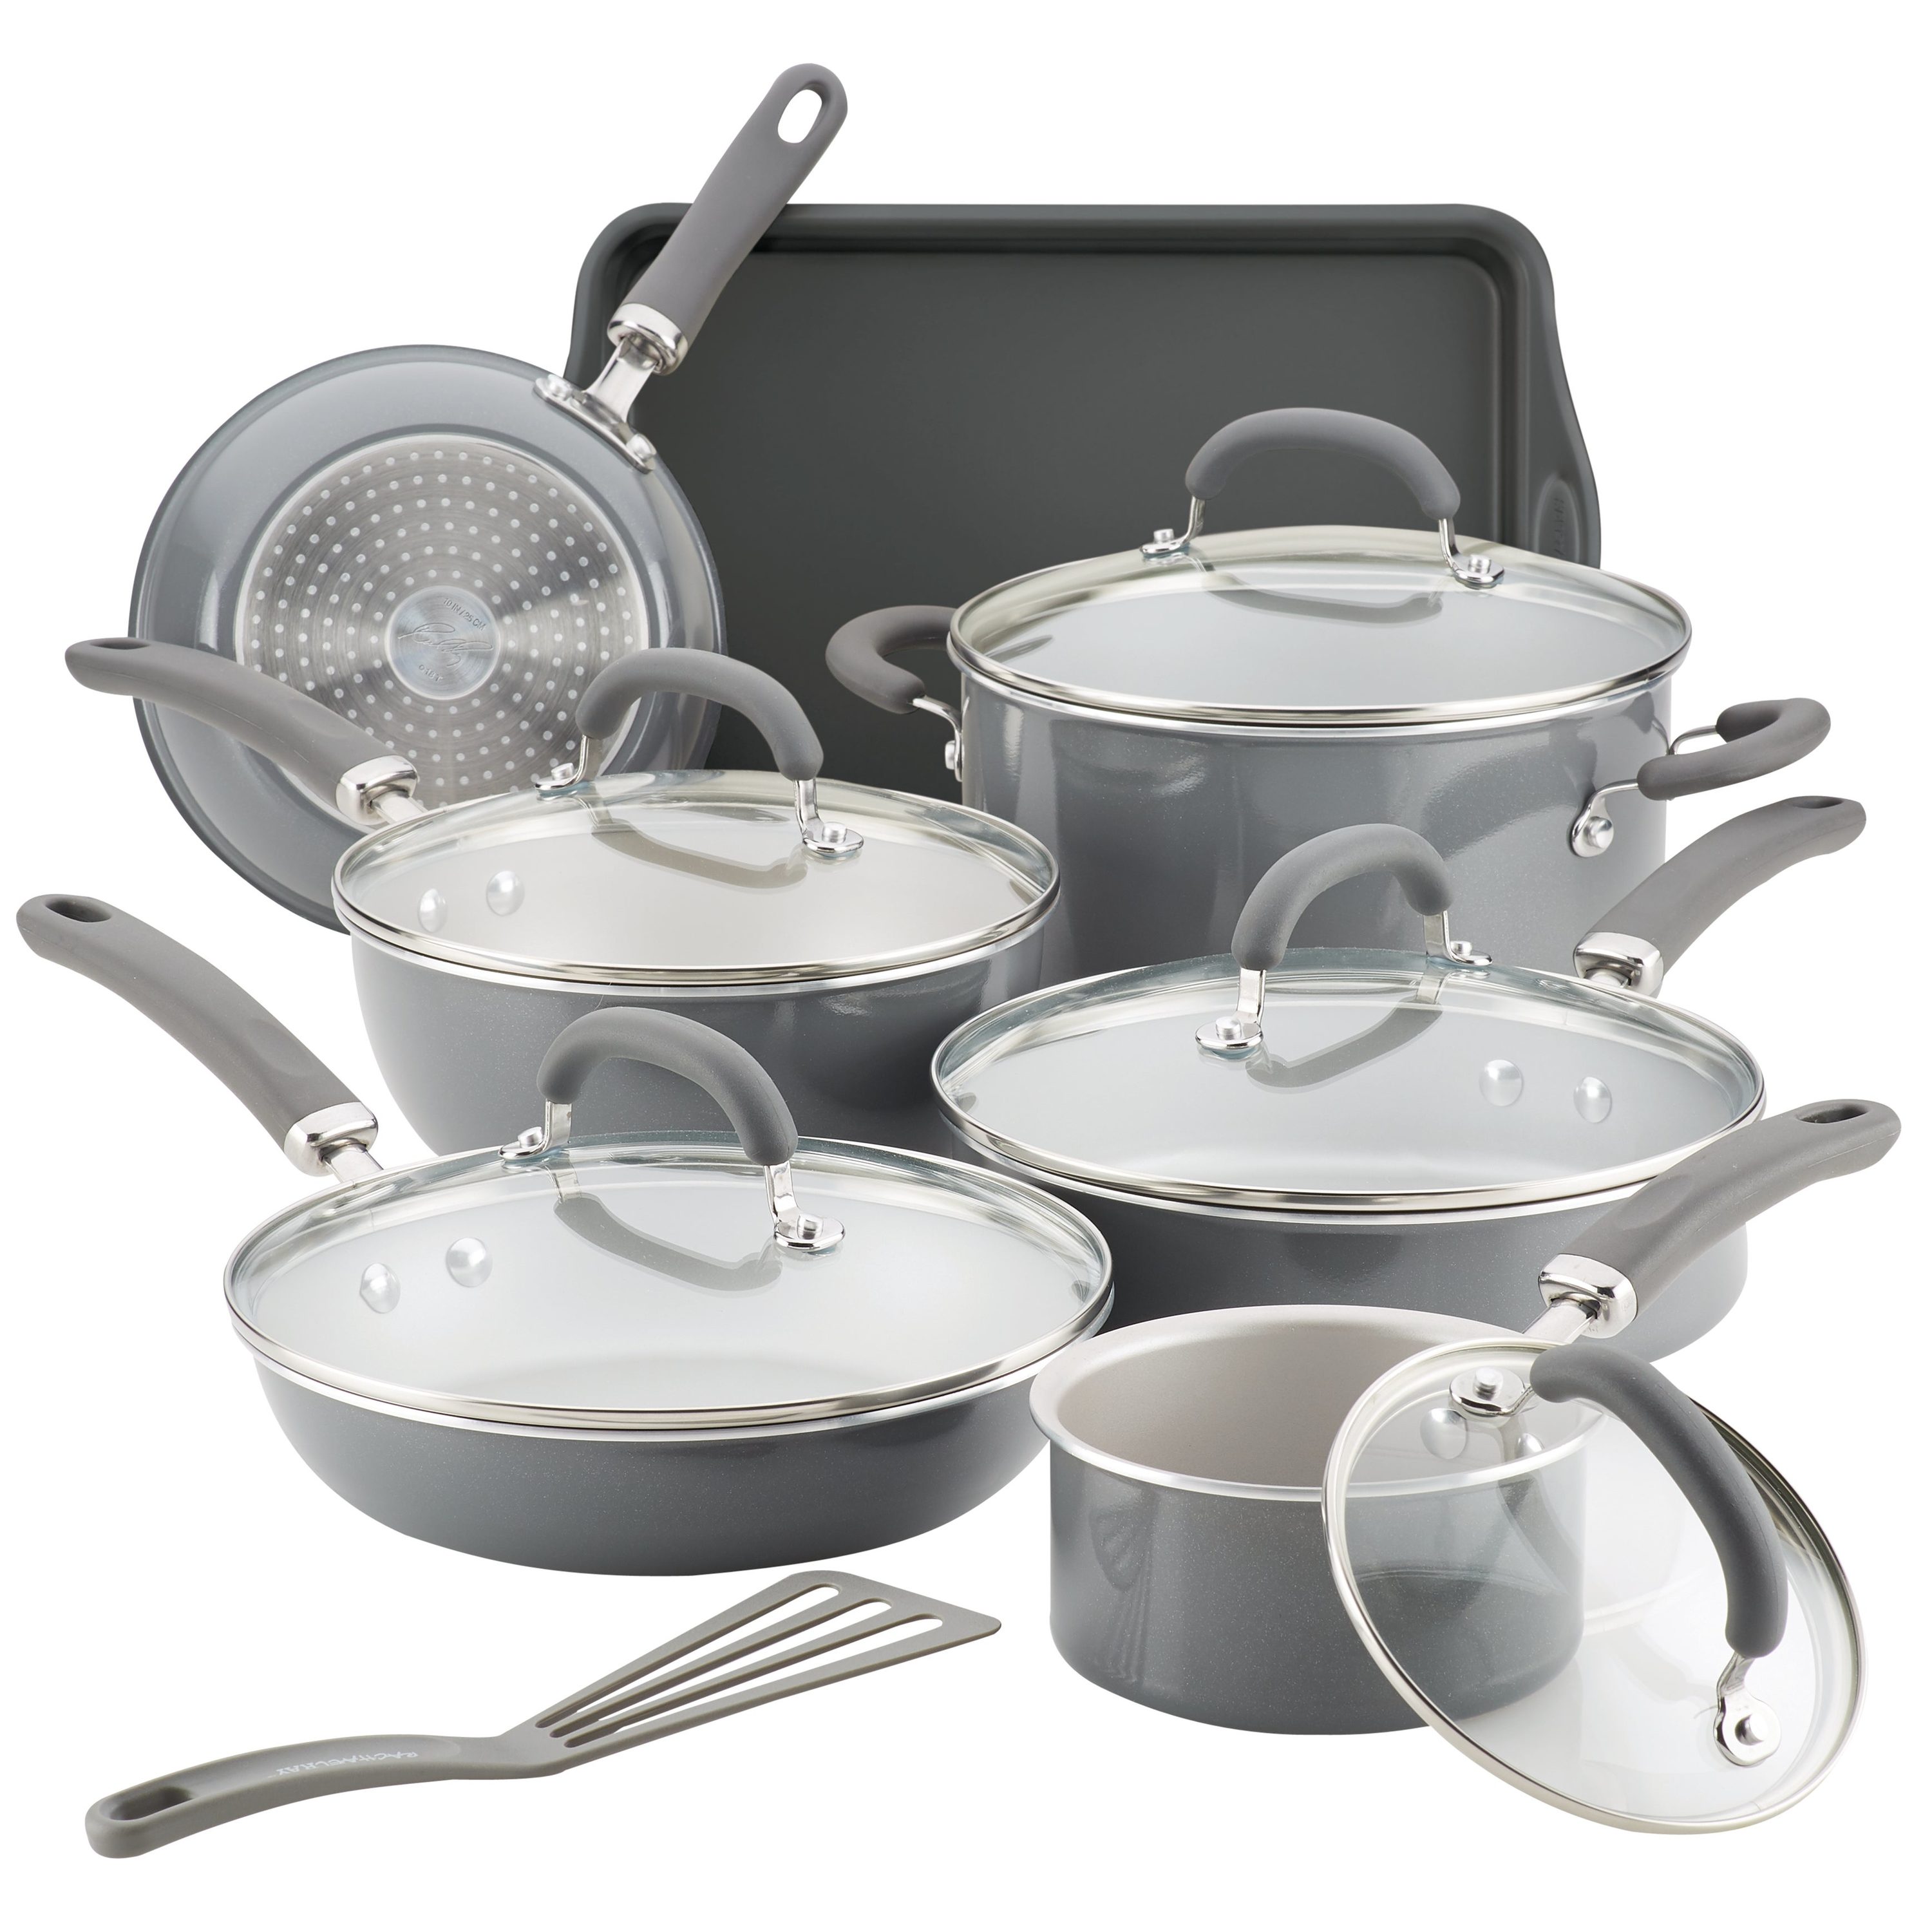 Rachael Ray Create Delicious 13pc Enameled Aluminum Cookware, Gray